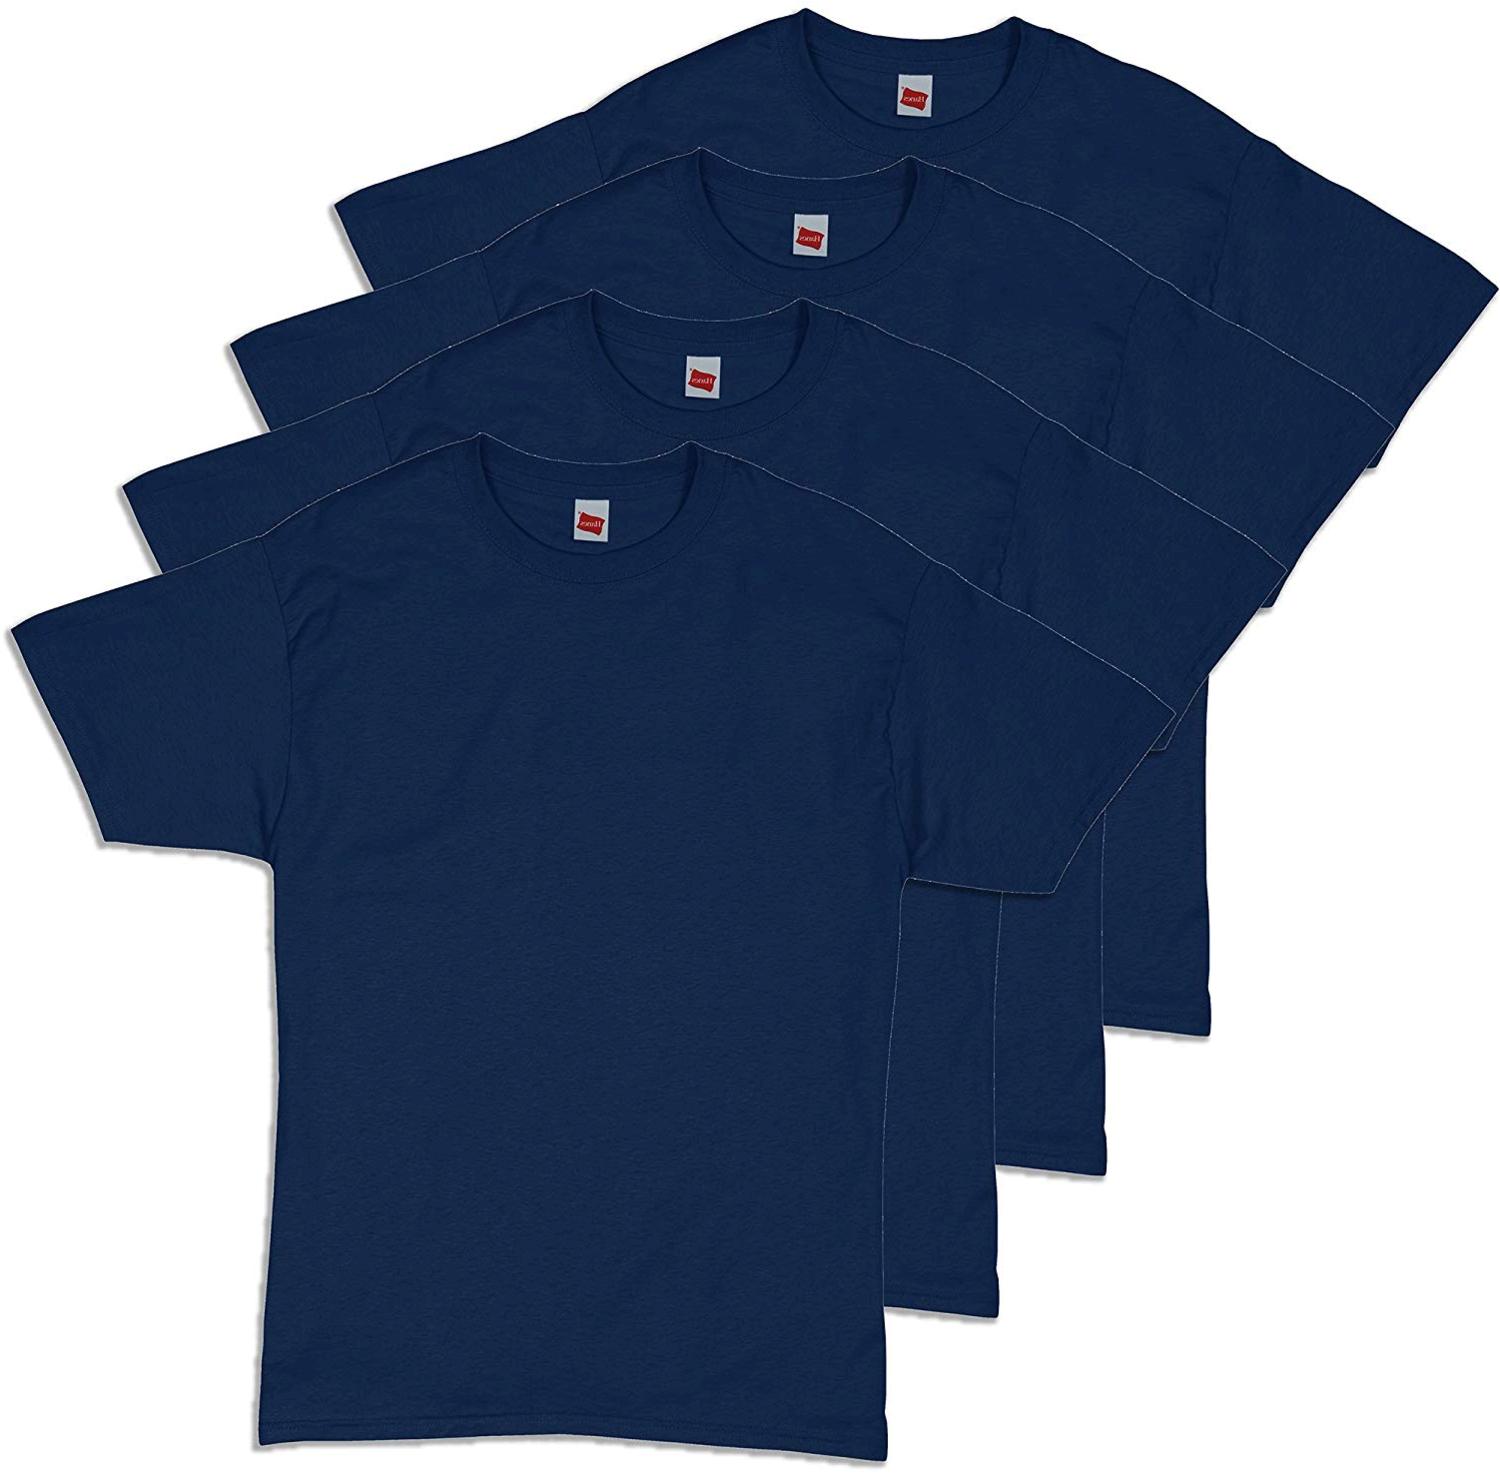 Hanes Men's Comfortsoft T-Shirt (Pack Of 4),Navy,Large, Navy, Size ...